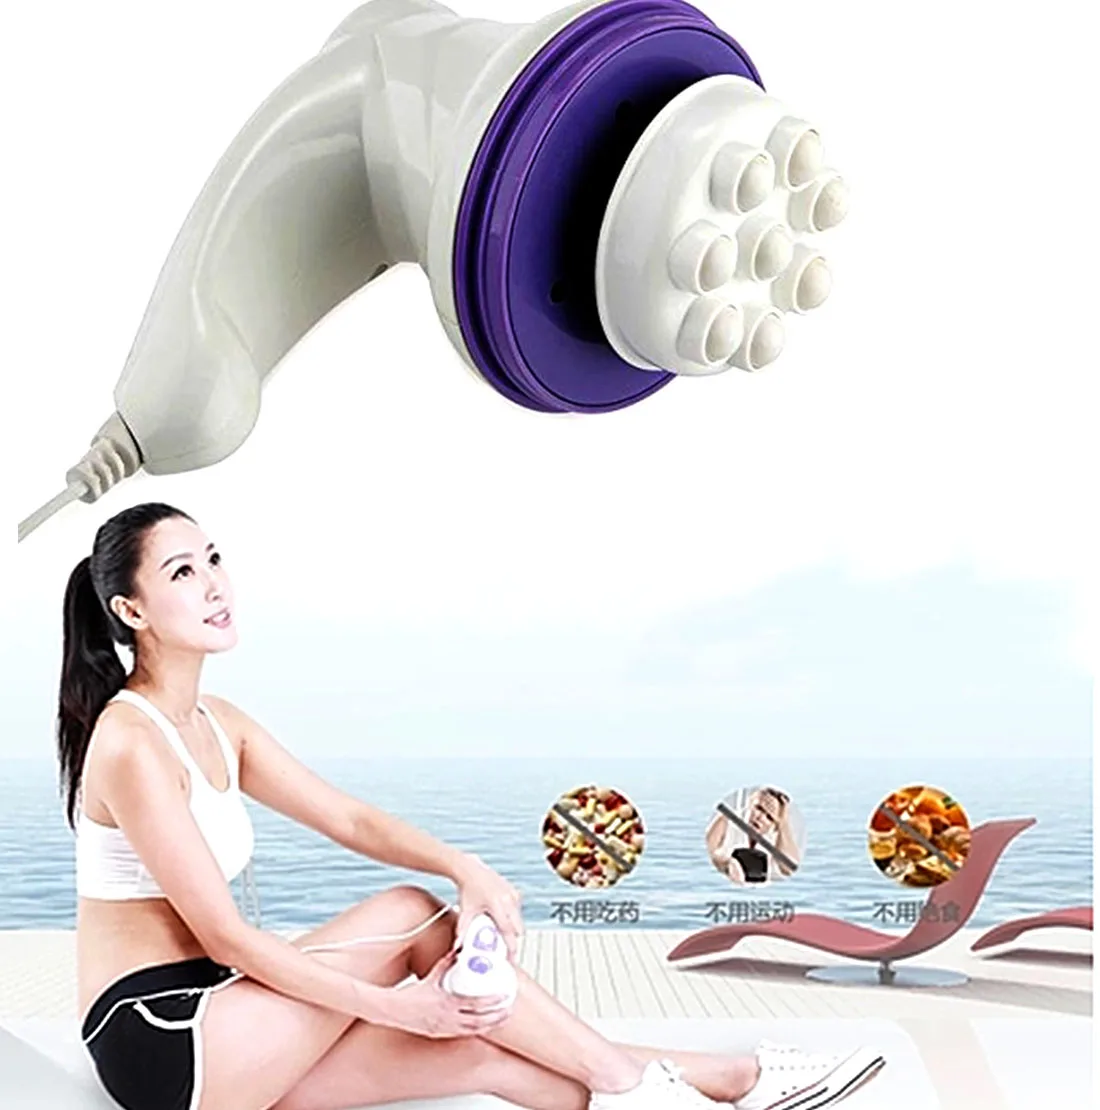 New Slimming Full Body Massage Device Fat Reducing Machine Health Care Products